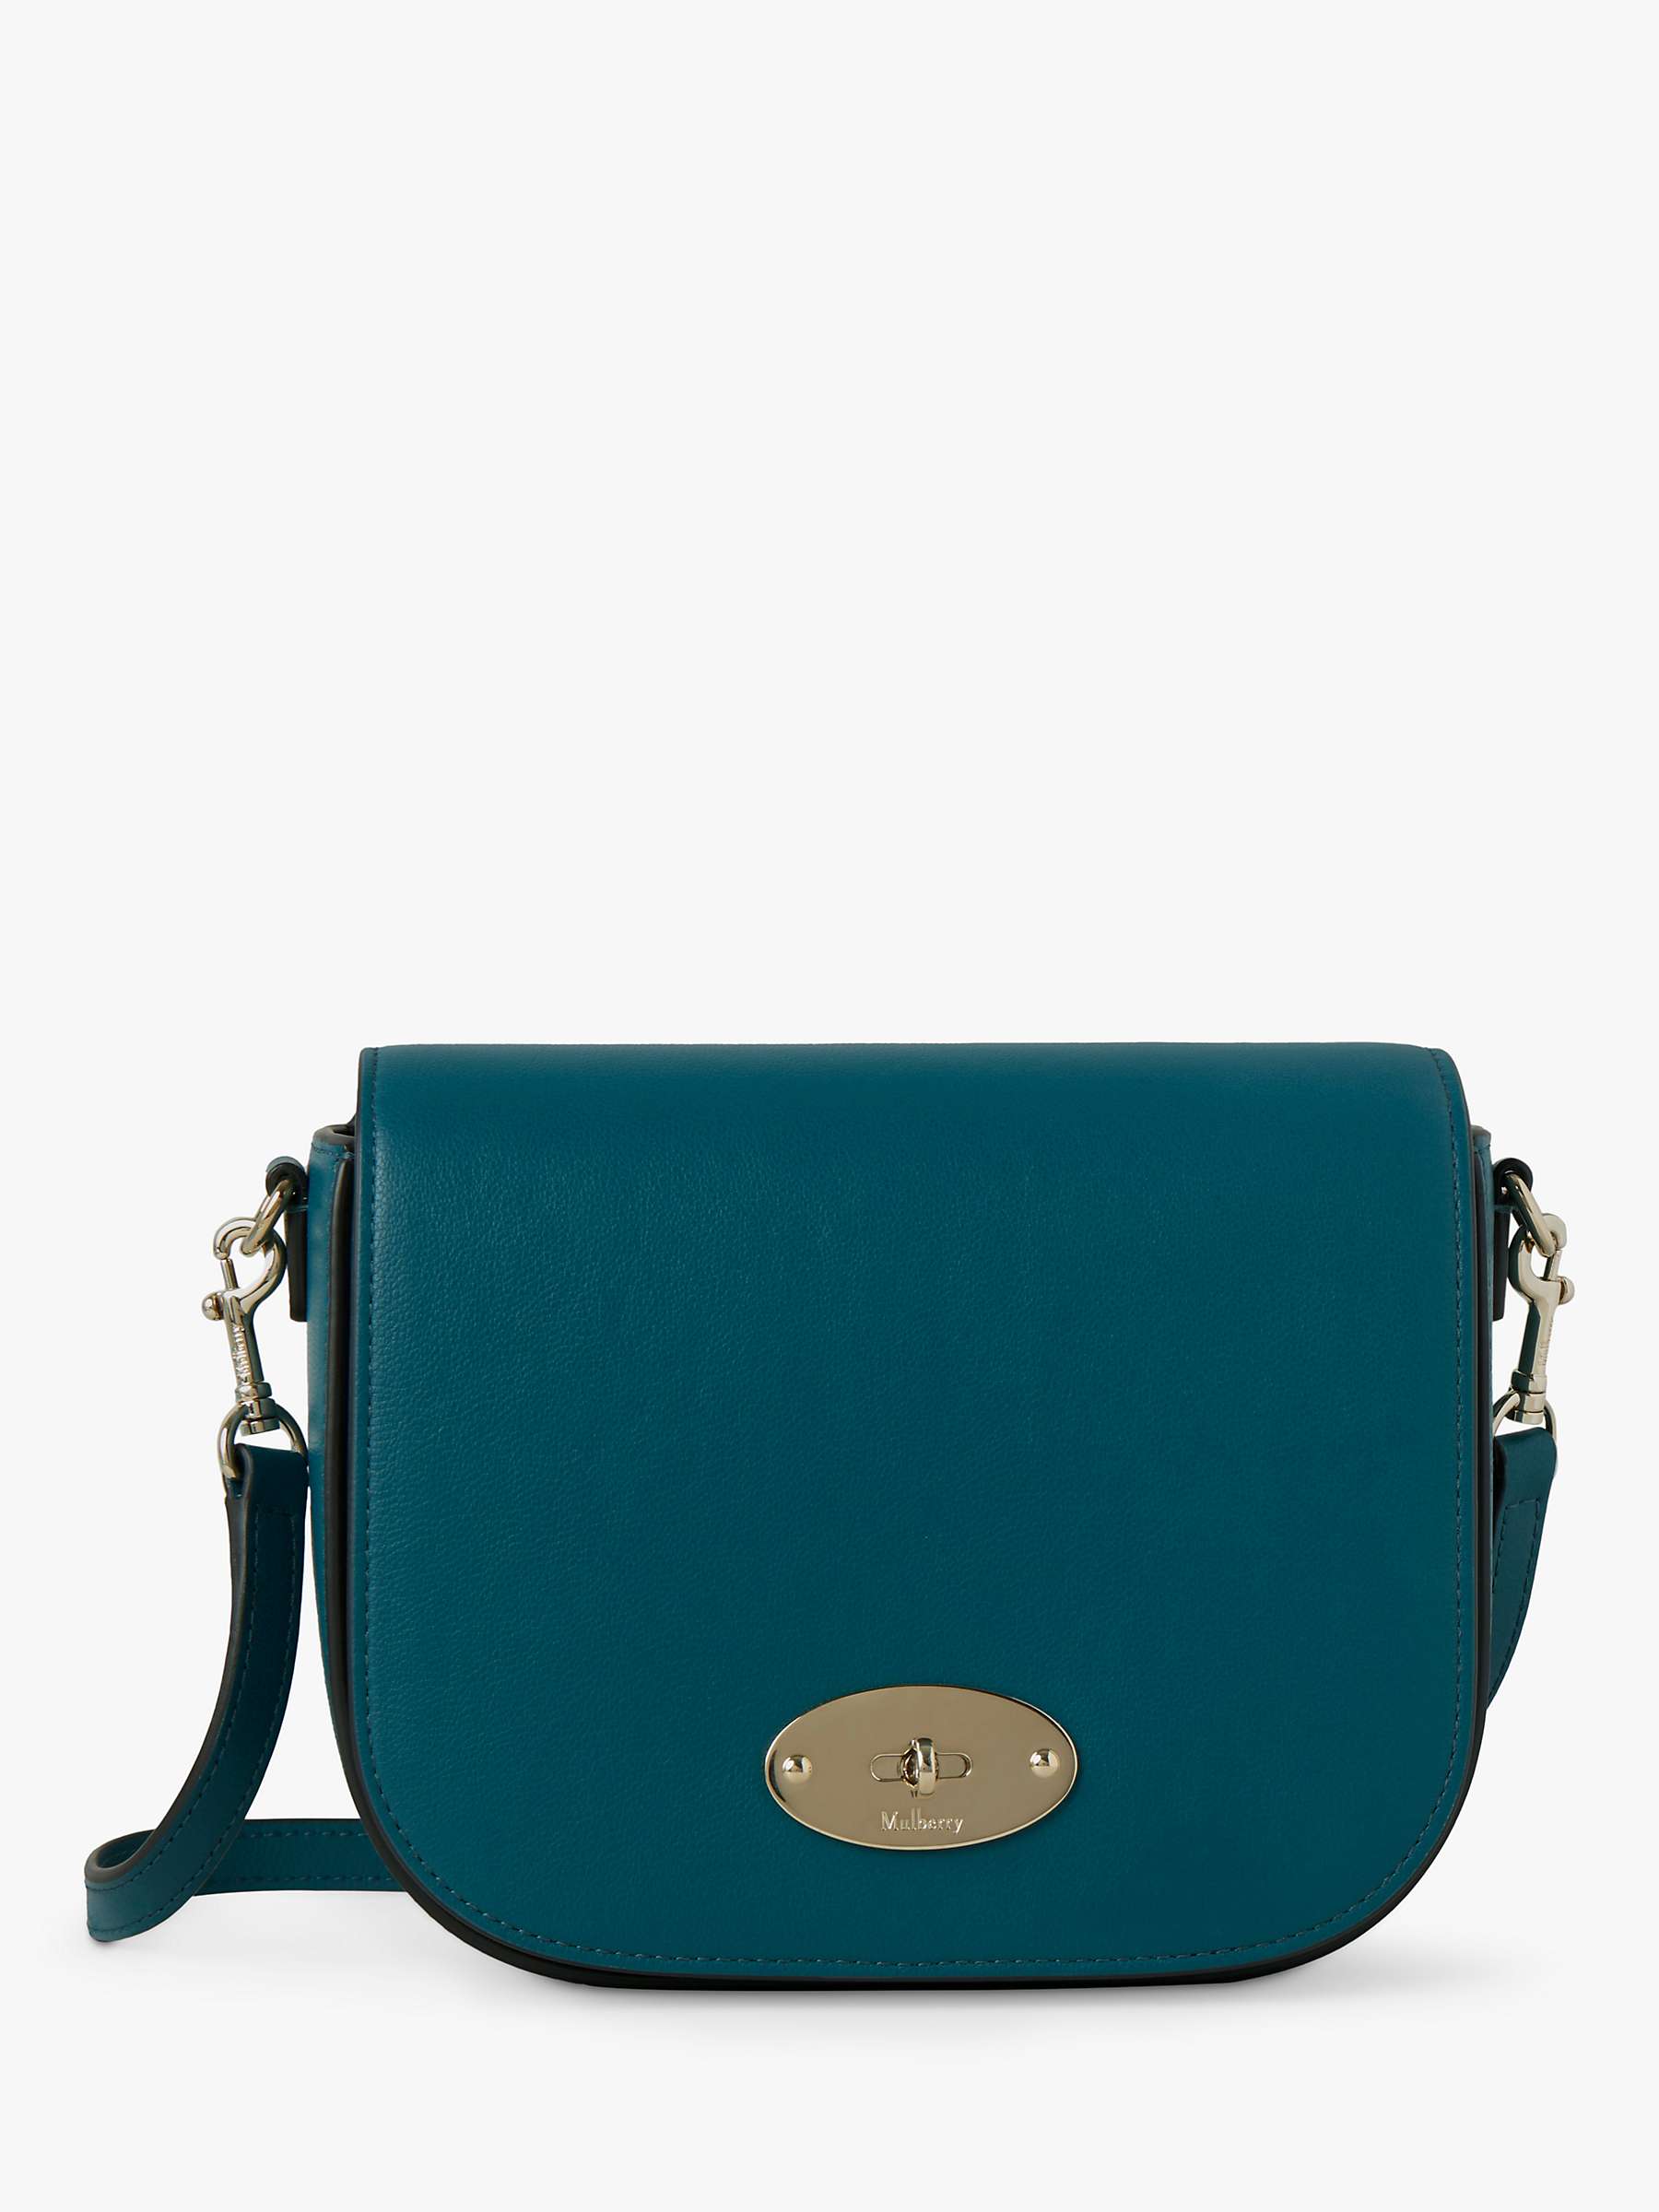 Buy Mulberry Small Darley Classic Grain Leather Satchel Bag Online at johnlewis.com